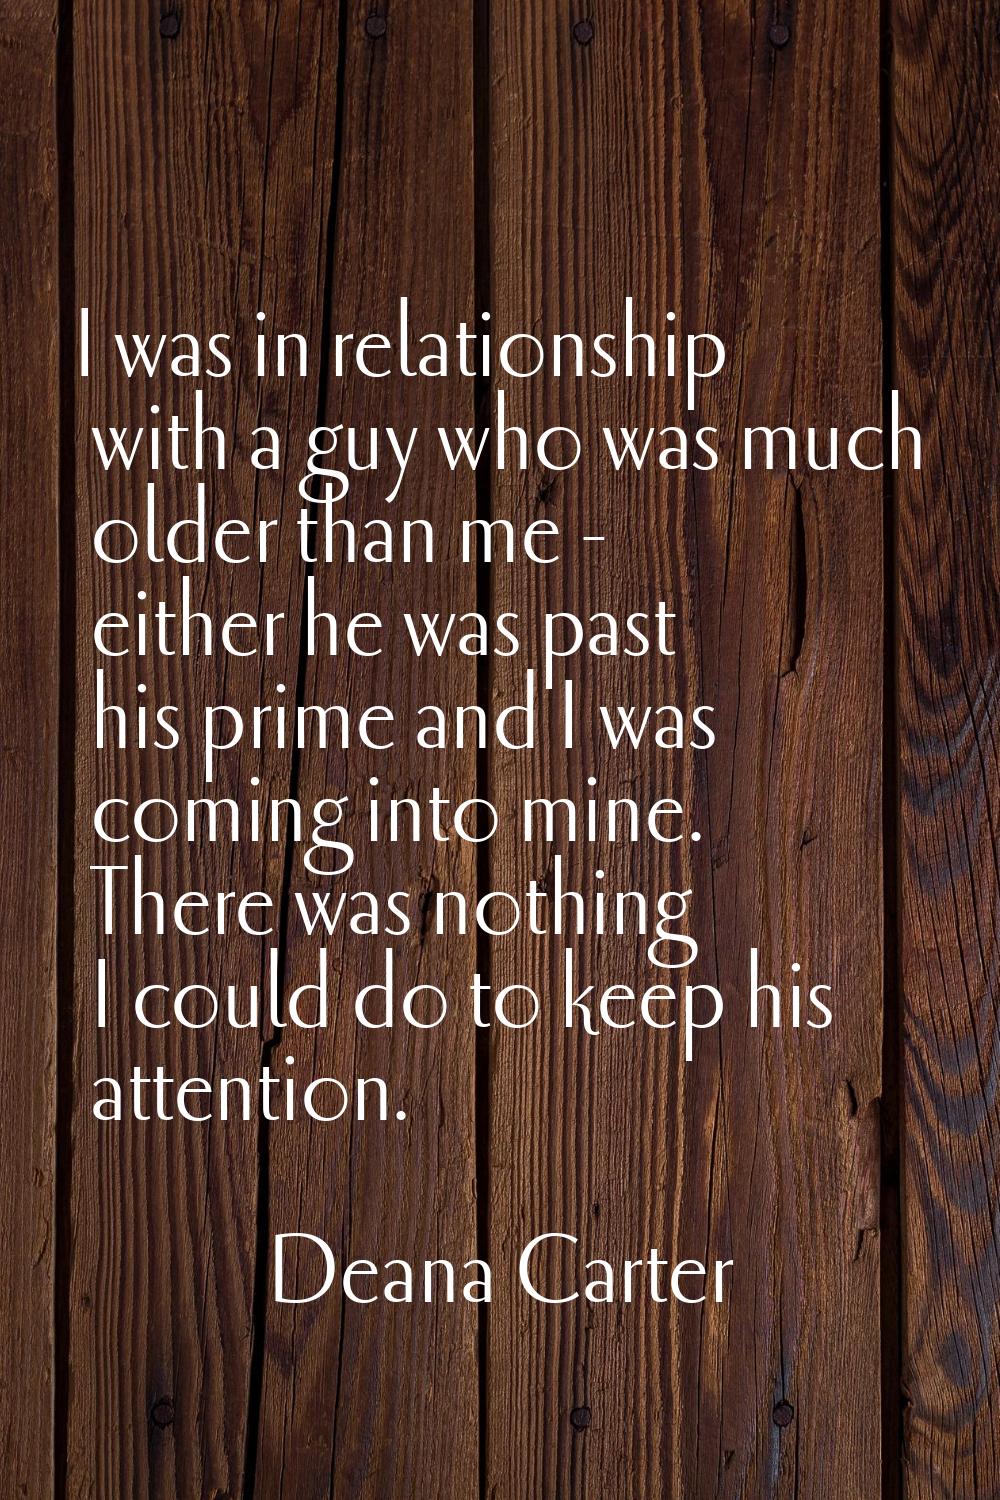 I was in relationship with a guy who was much older than me - either he was past his prime and I wa